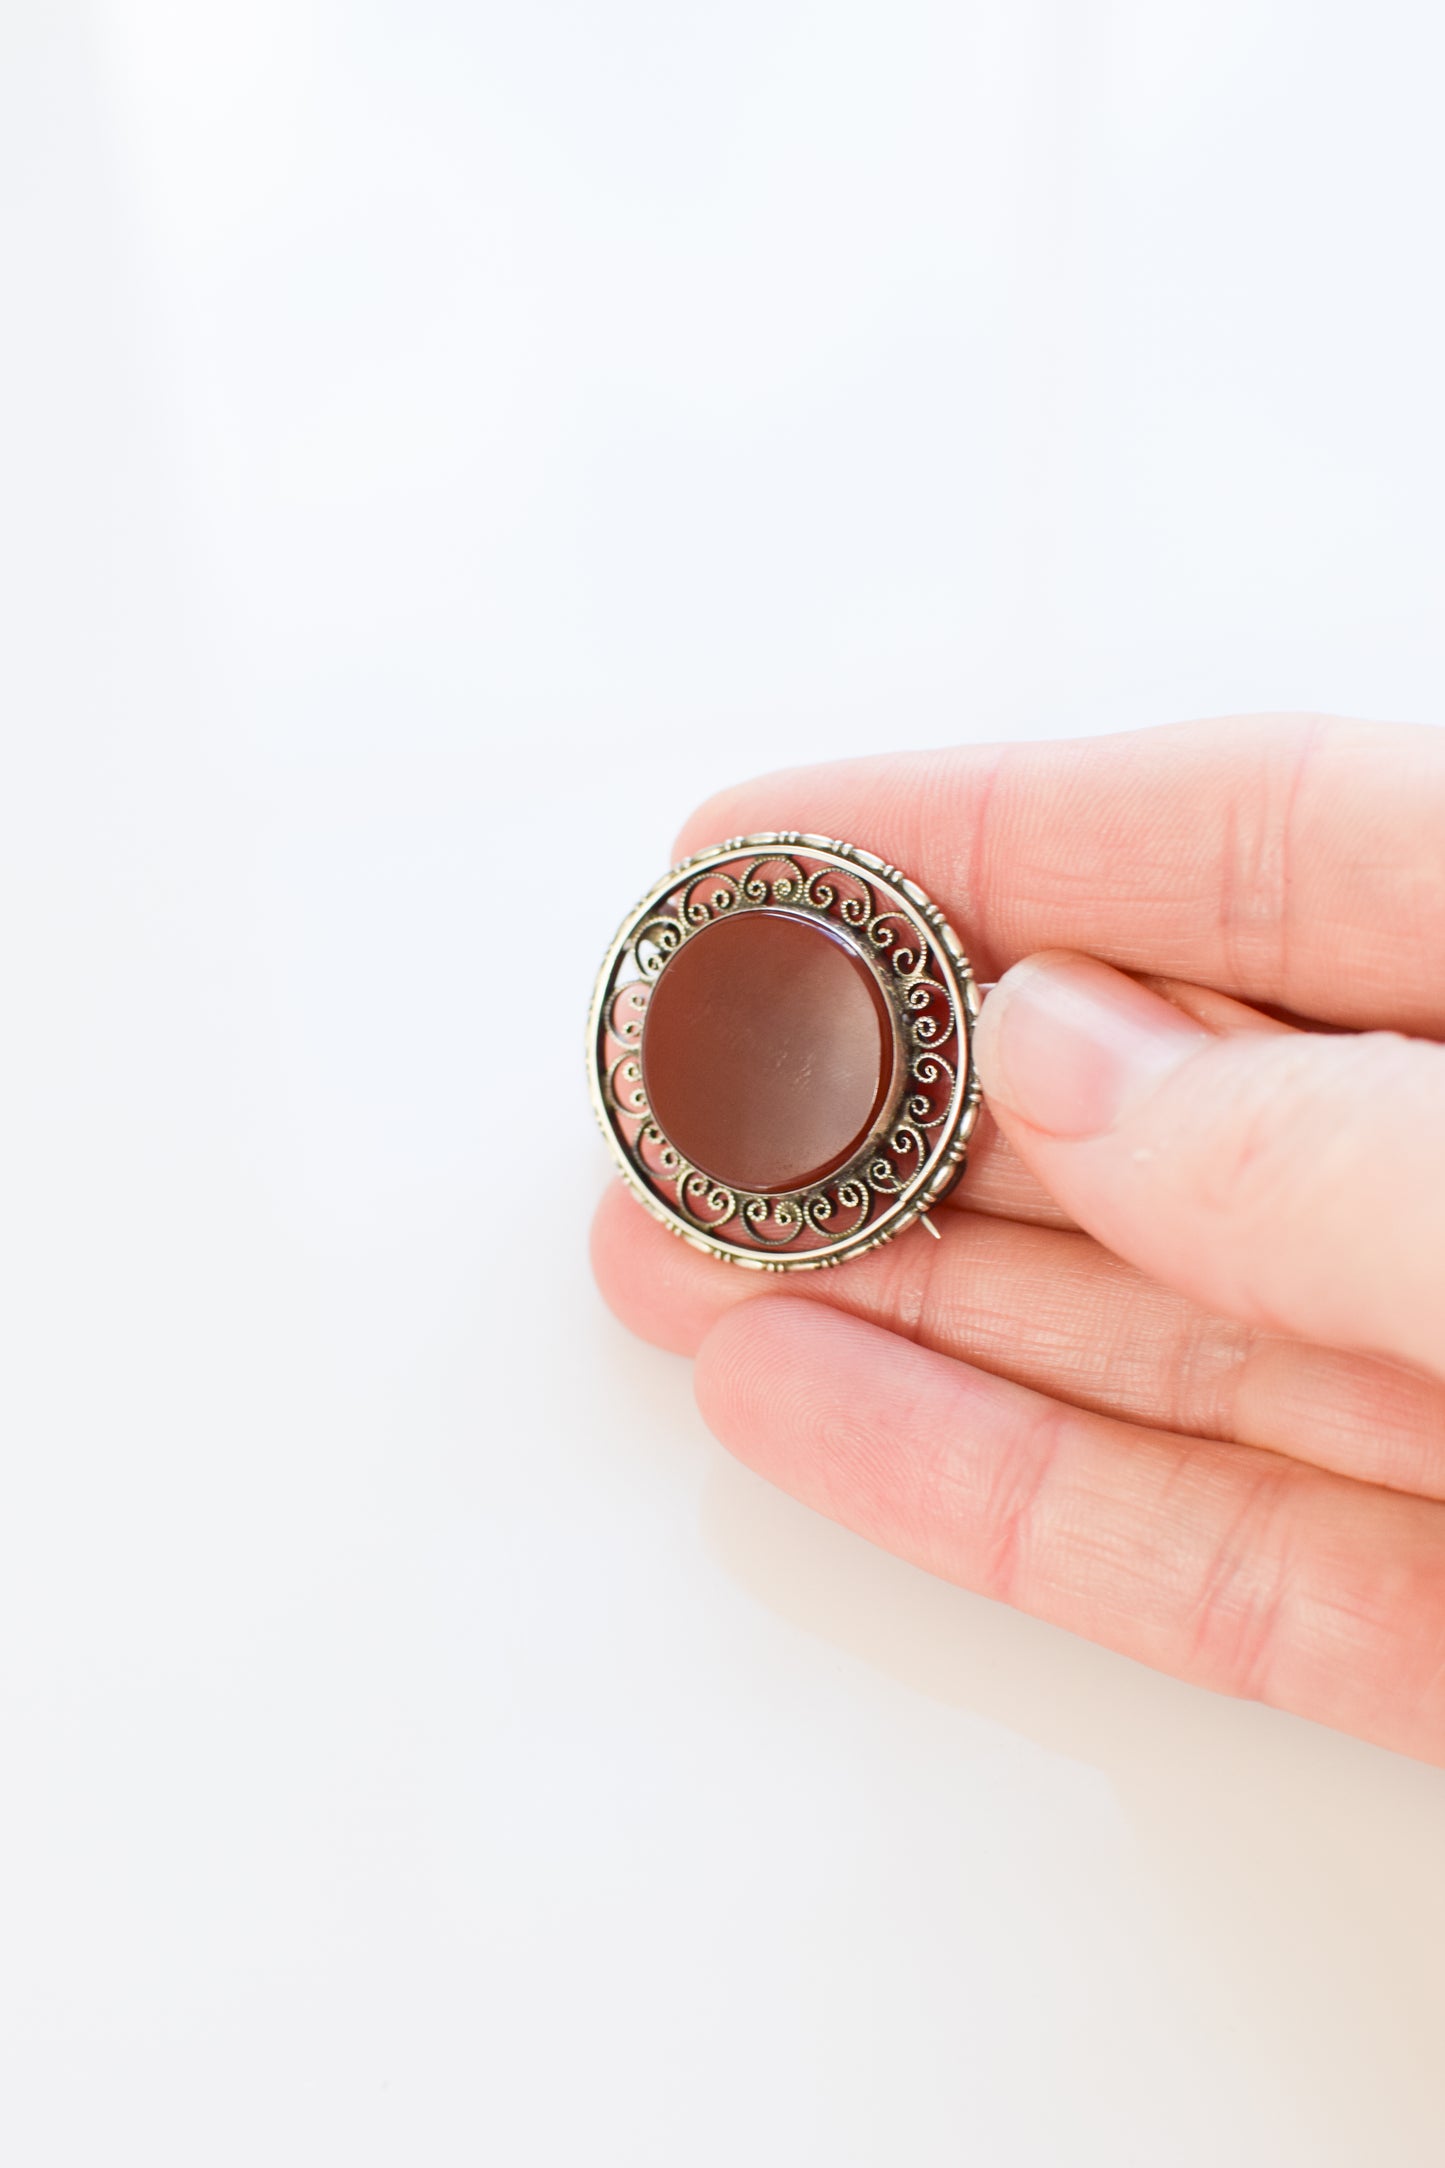 Antique Sterling Silver Filigree and Carnelian Brooch